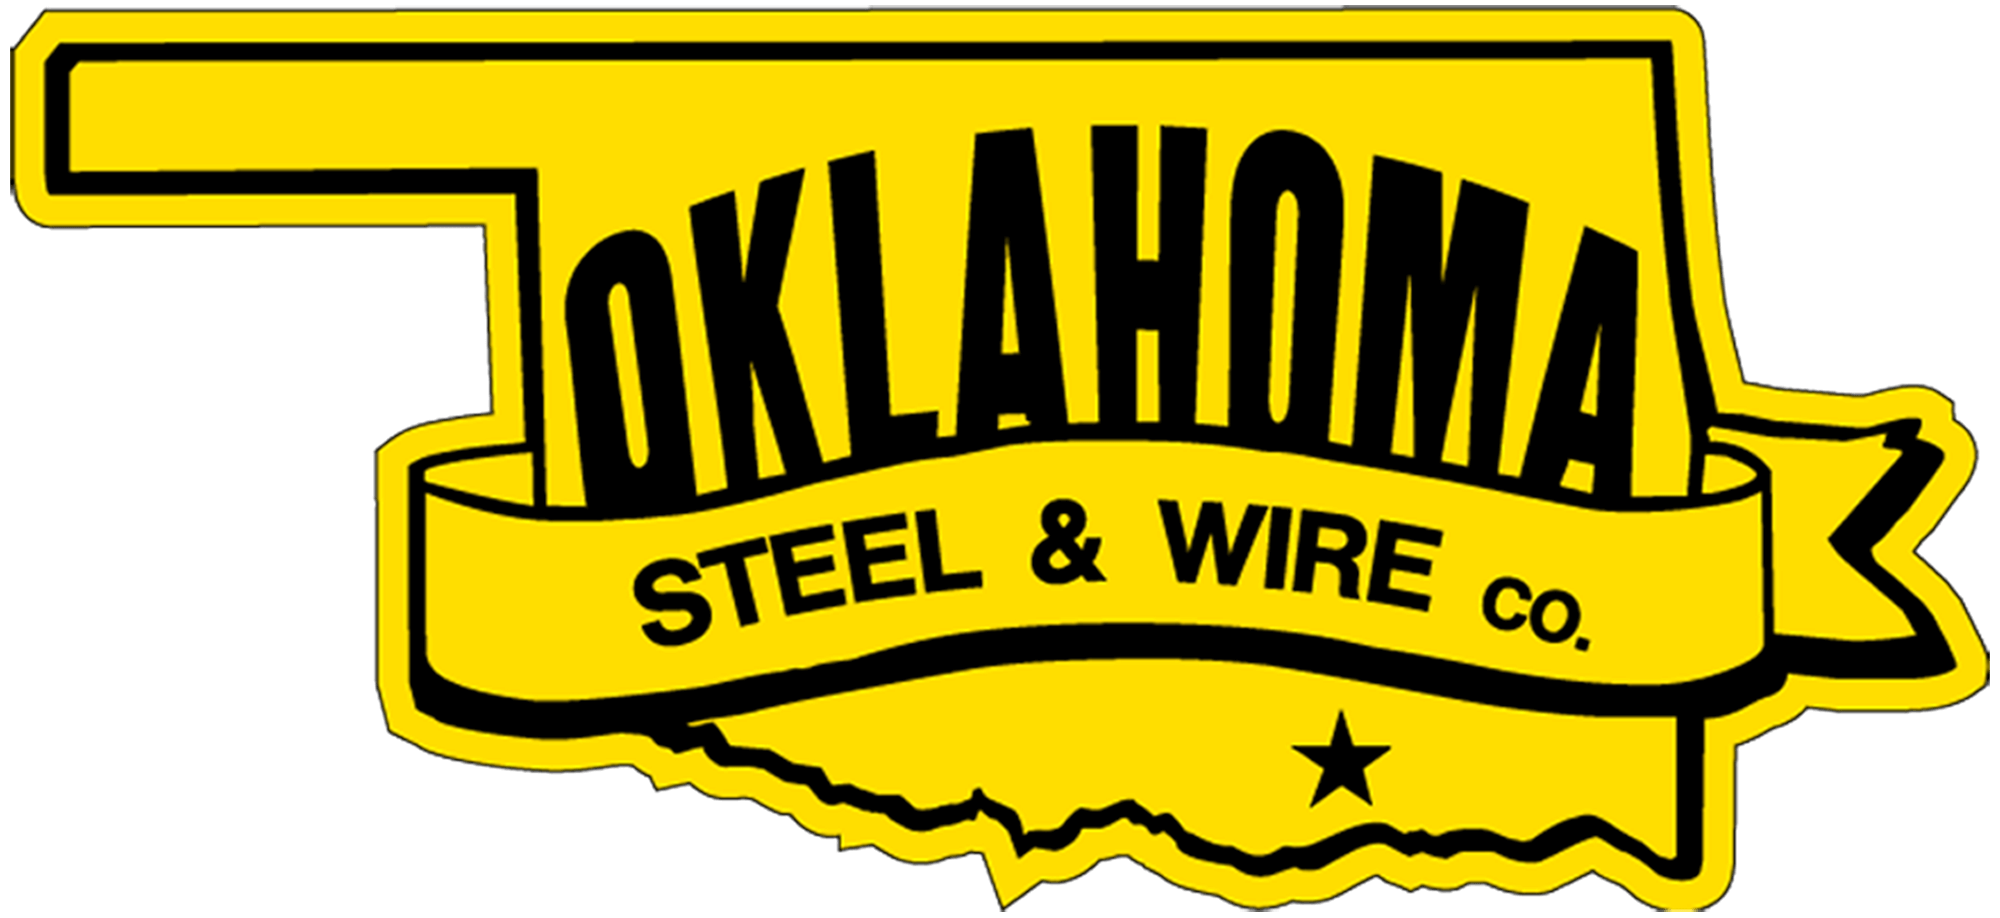 Oklahomas Steel & Wire - Ray Albright Steel Products